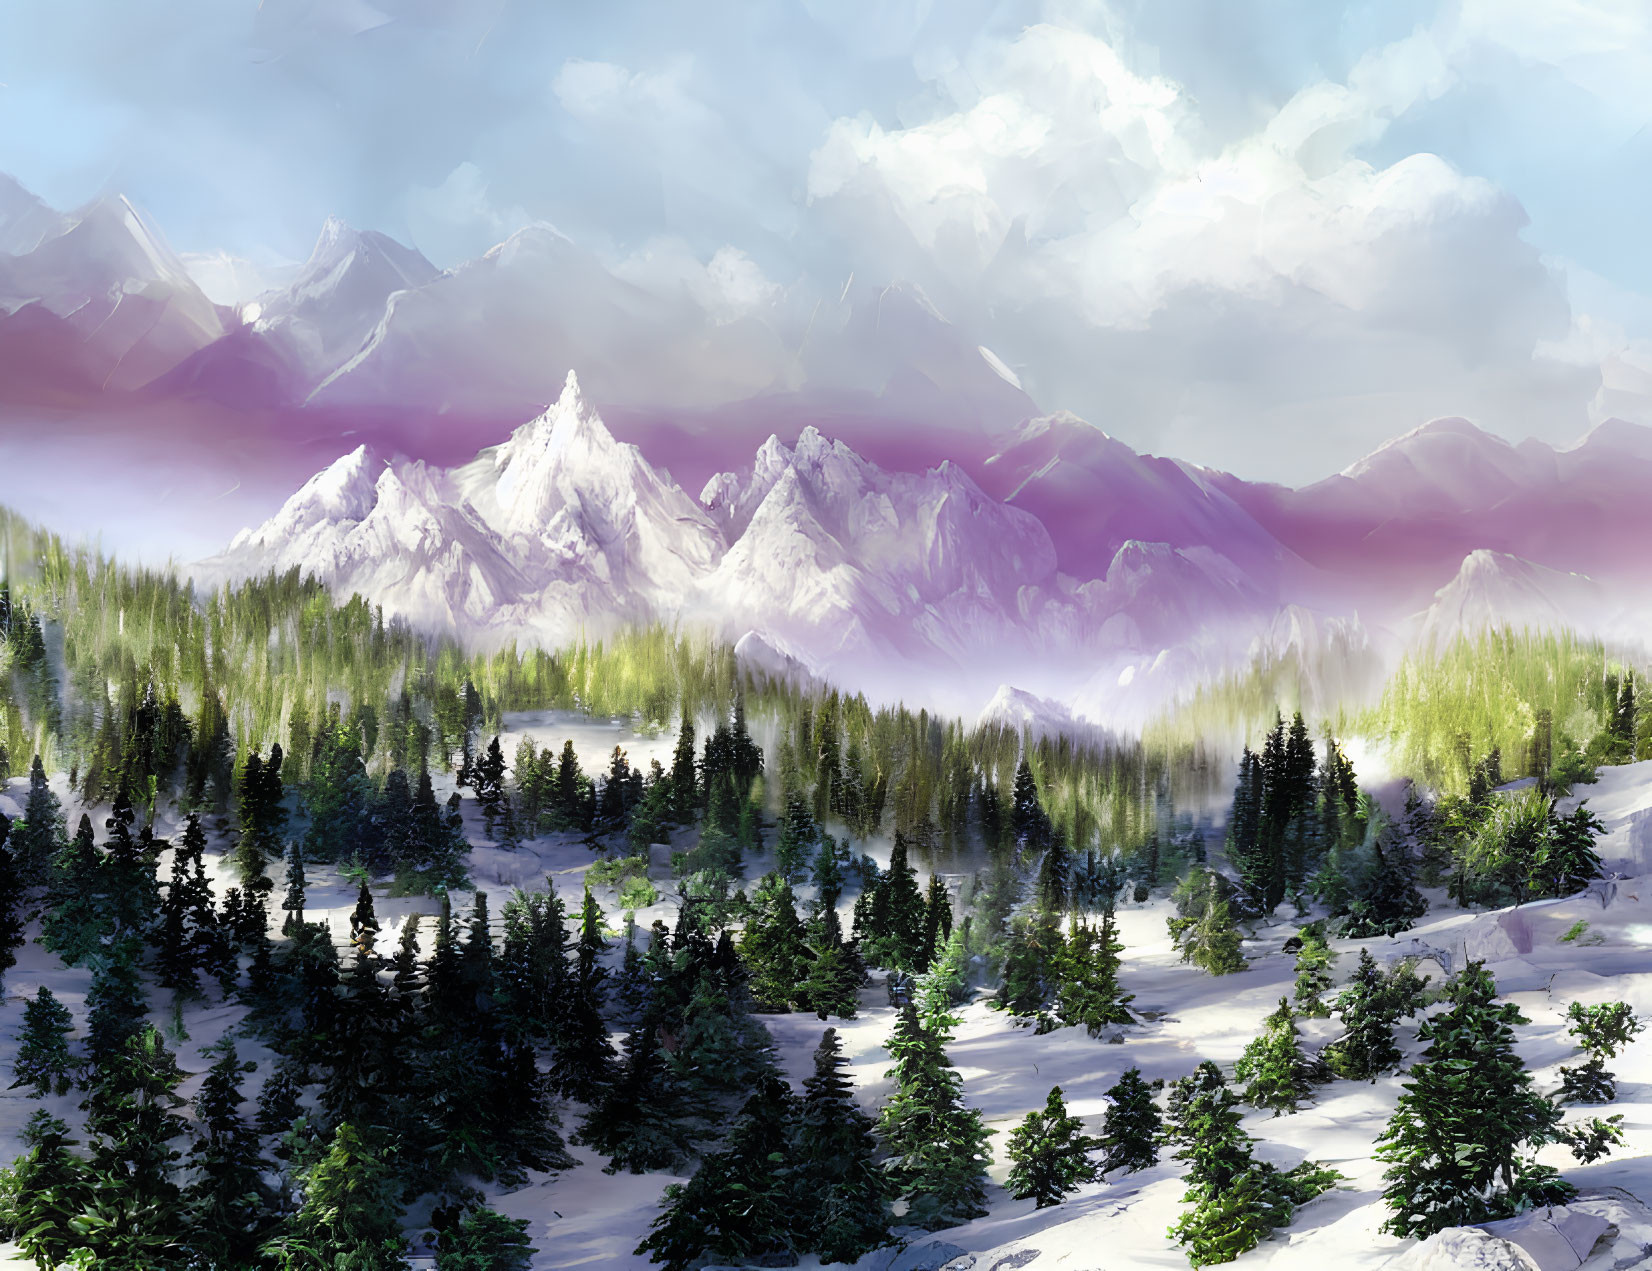 Majestic snowy mountain peaks and dense evergreen forest landscape blend seamlessly.